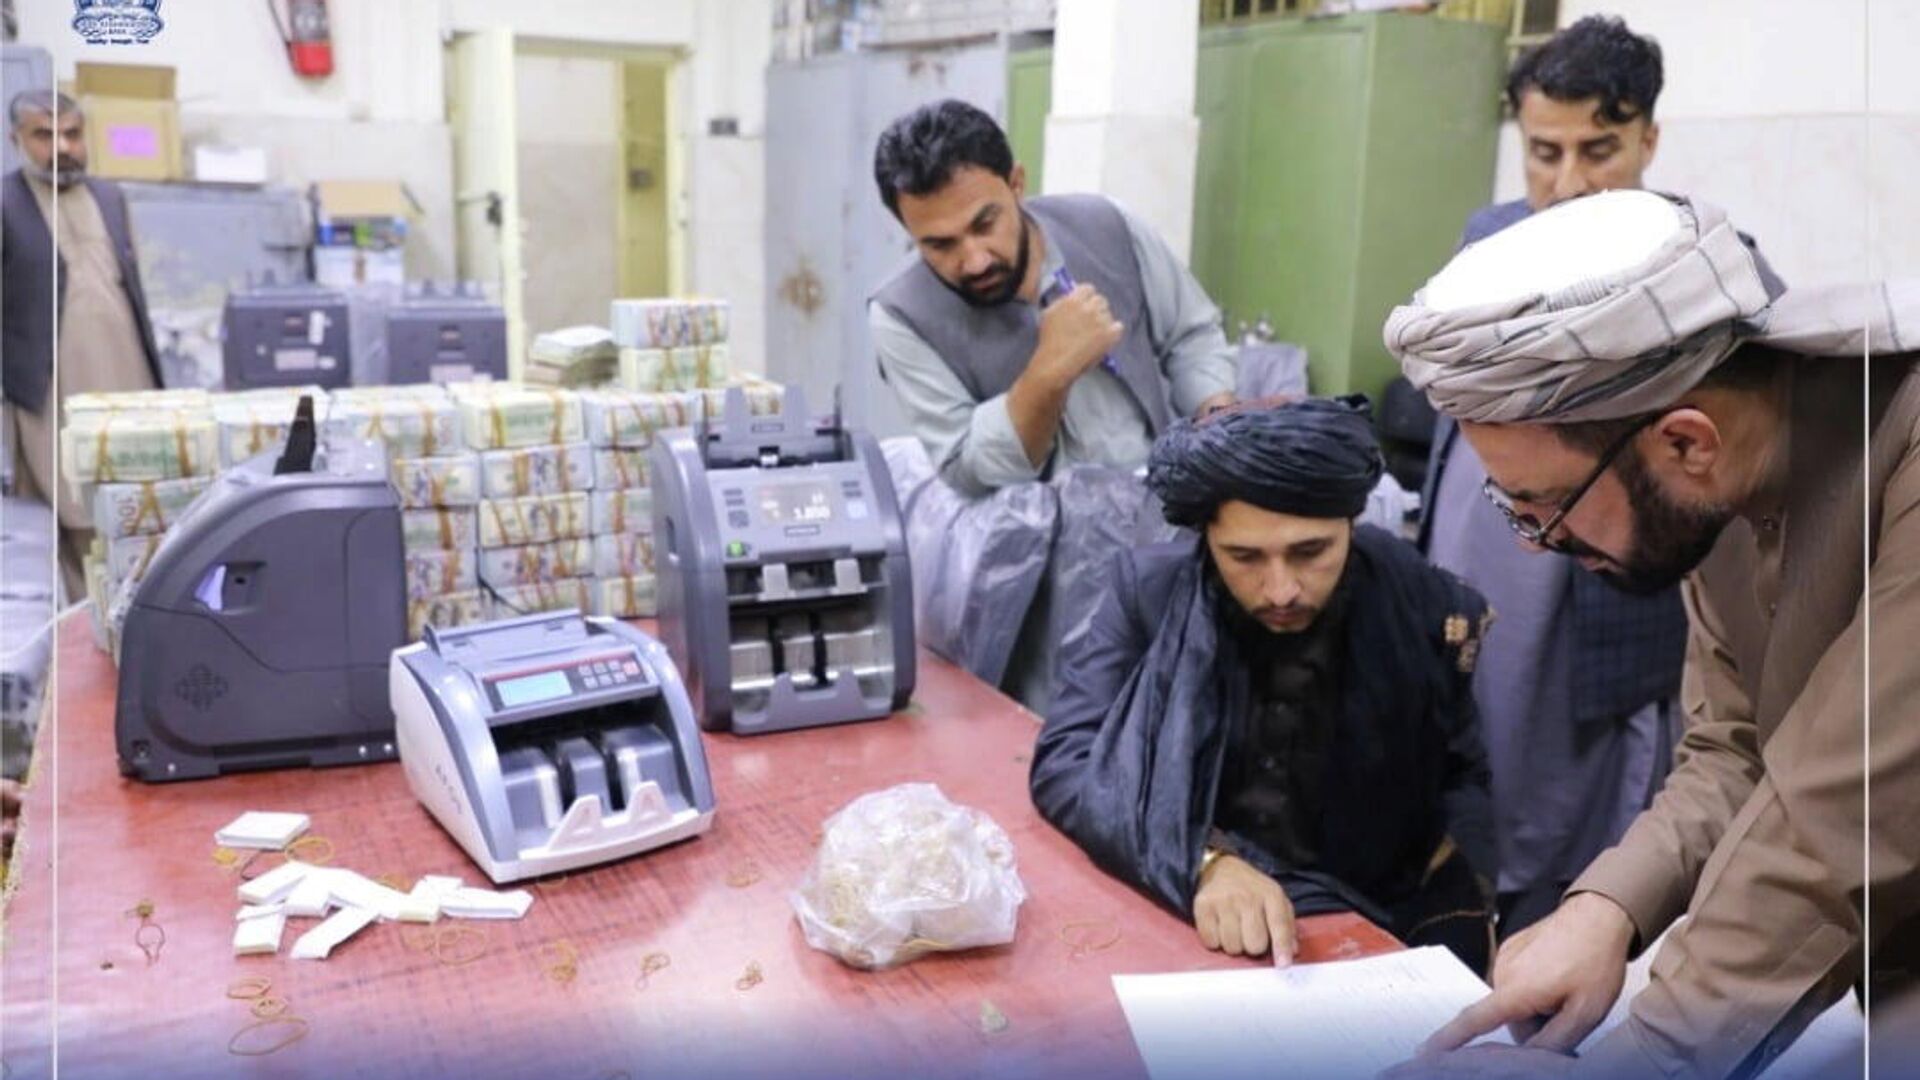 Men are pictured as Afghanistan's Taliban-controlled central bank seizes a large amount of money in cash and gold from former top government officials, including former vice president Amrullah Saleh, in Afghanistan, in this handout obtained by Reuters on September 15, 2021 - Sputnik International, 1920, 12.10.2021